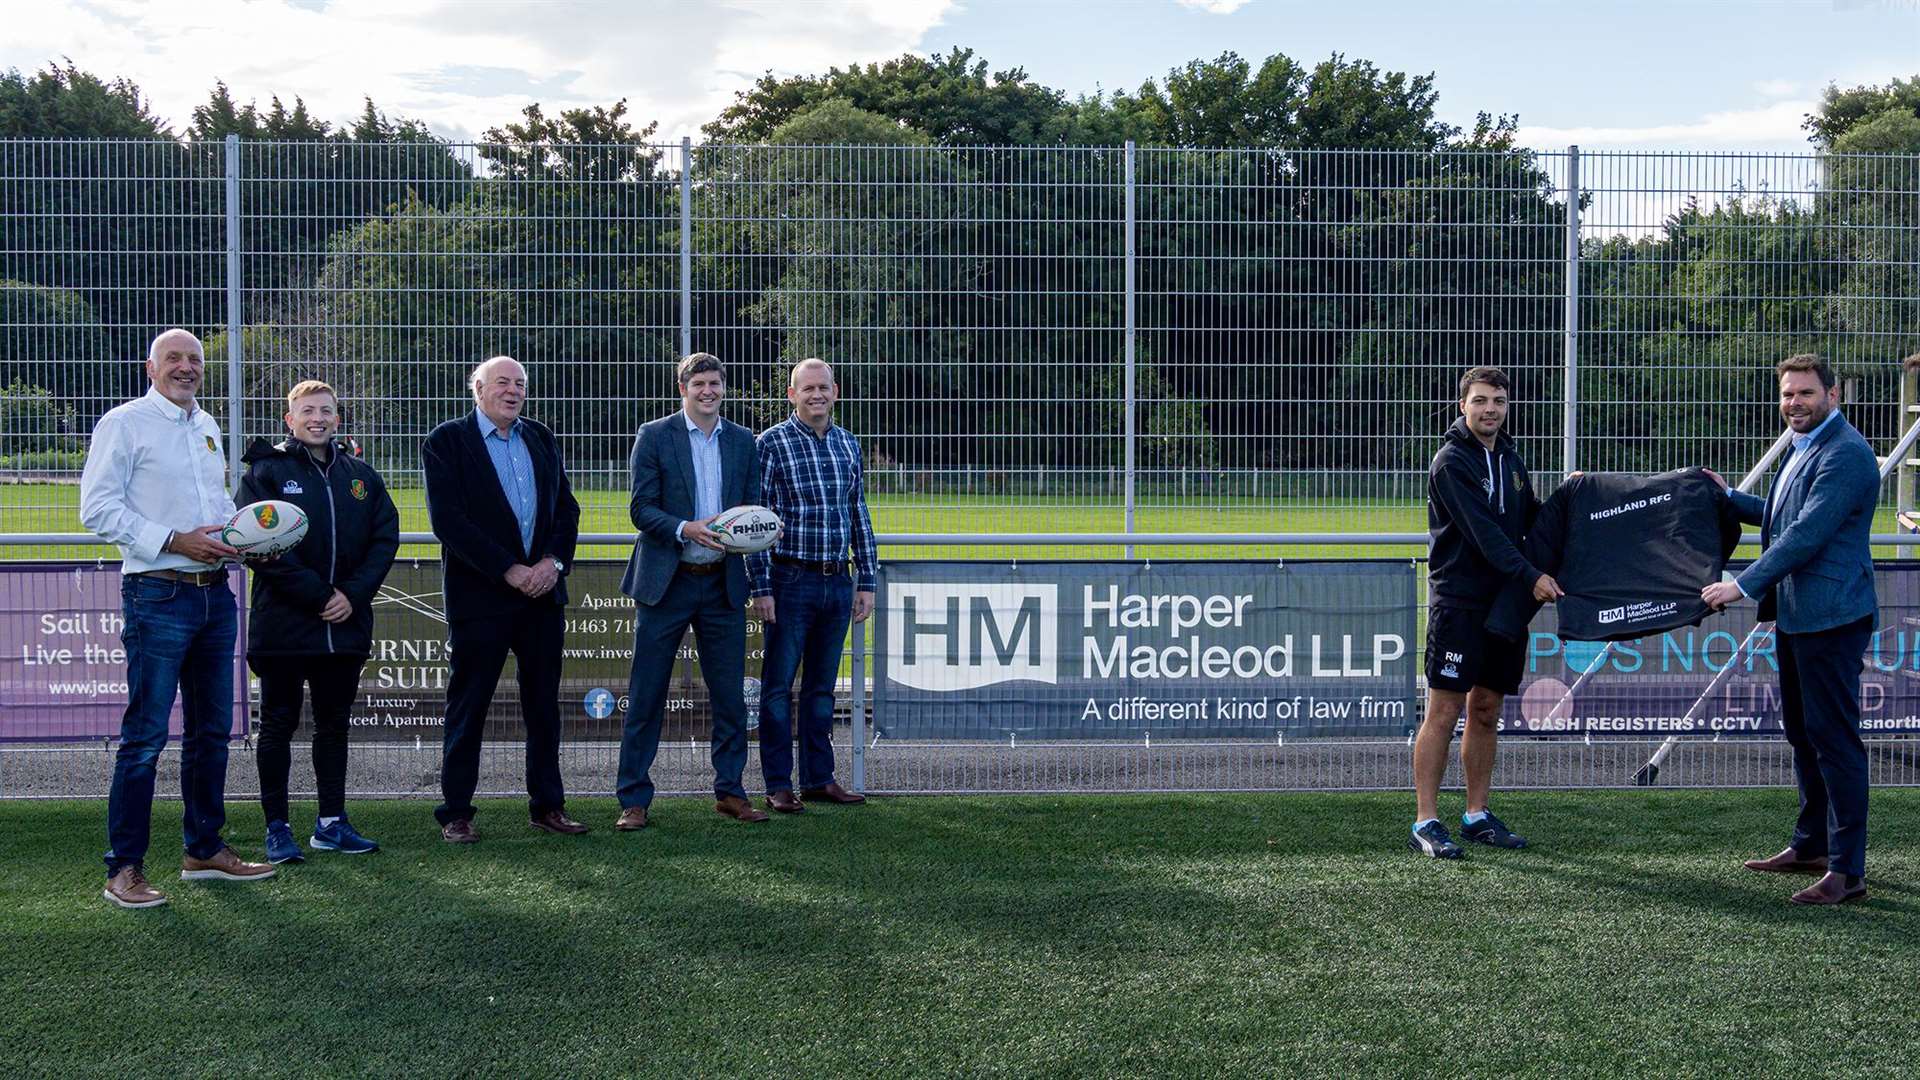 Chris Kerr, Head of Harper Macleod’s team in the Highlands and Islands, and Development Officer Ruaridh MacDonald mark the partnership while Director of Rugby Brian Bell, Development Officer Hugo Crush, and Harper Macleod’s David Eason, Calum MacLeod and Ross Thomson look on. Picture: Owen Cochrane